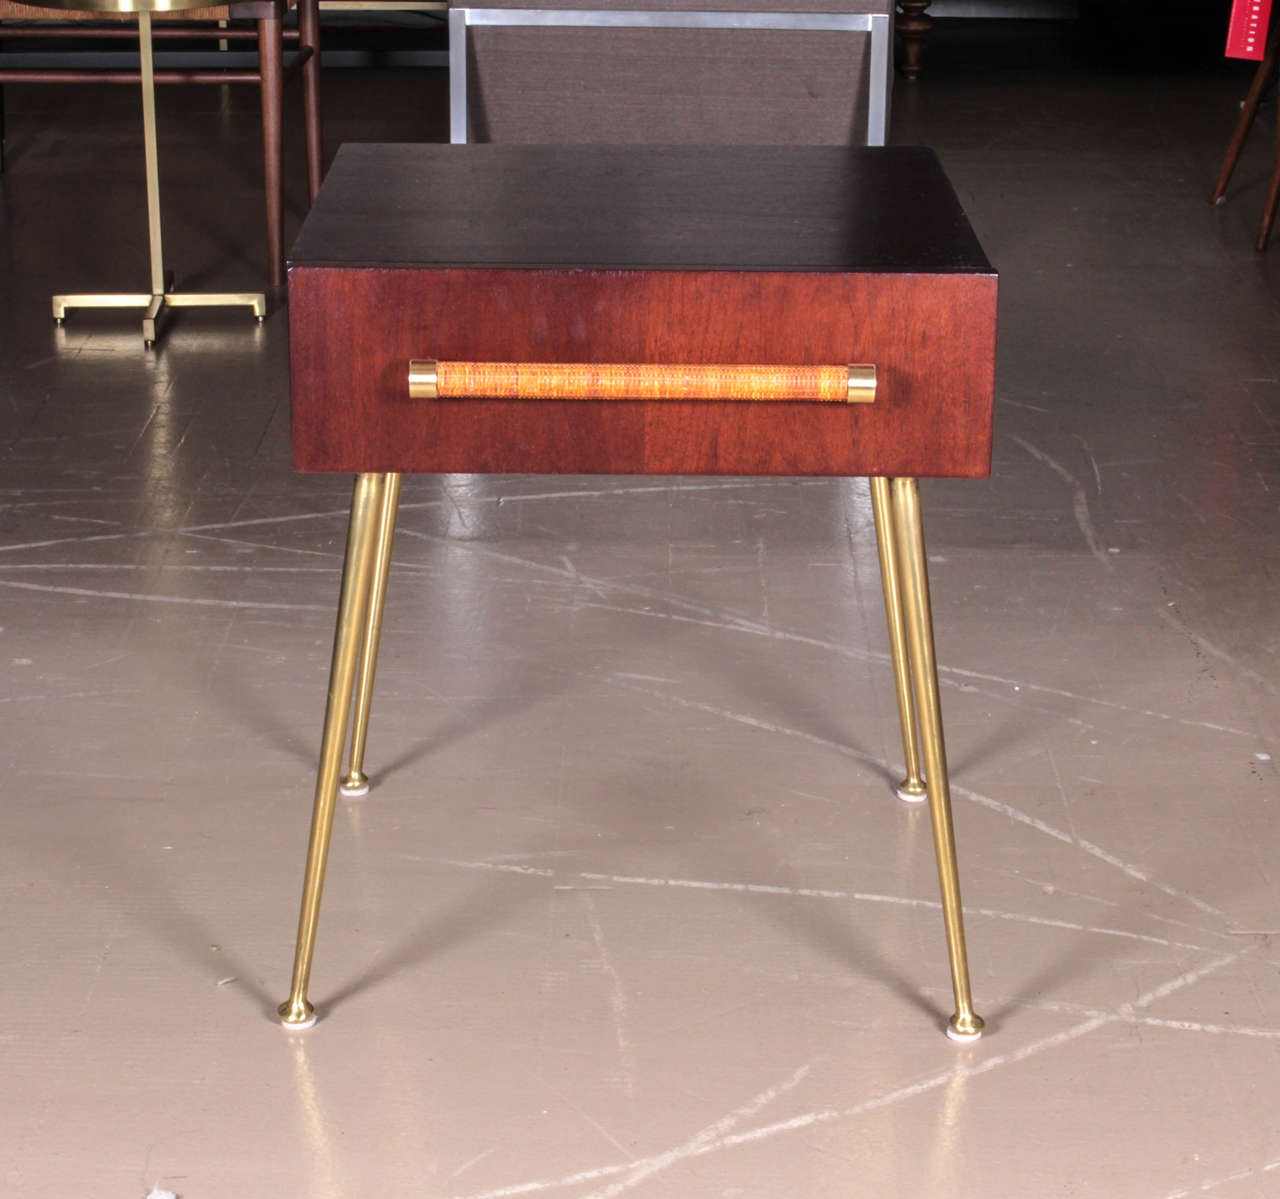 Single mahogany side table with brass legs and cane handles by T.H. Robsjohn-Gibbings for Widdicomb.